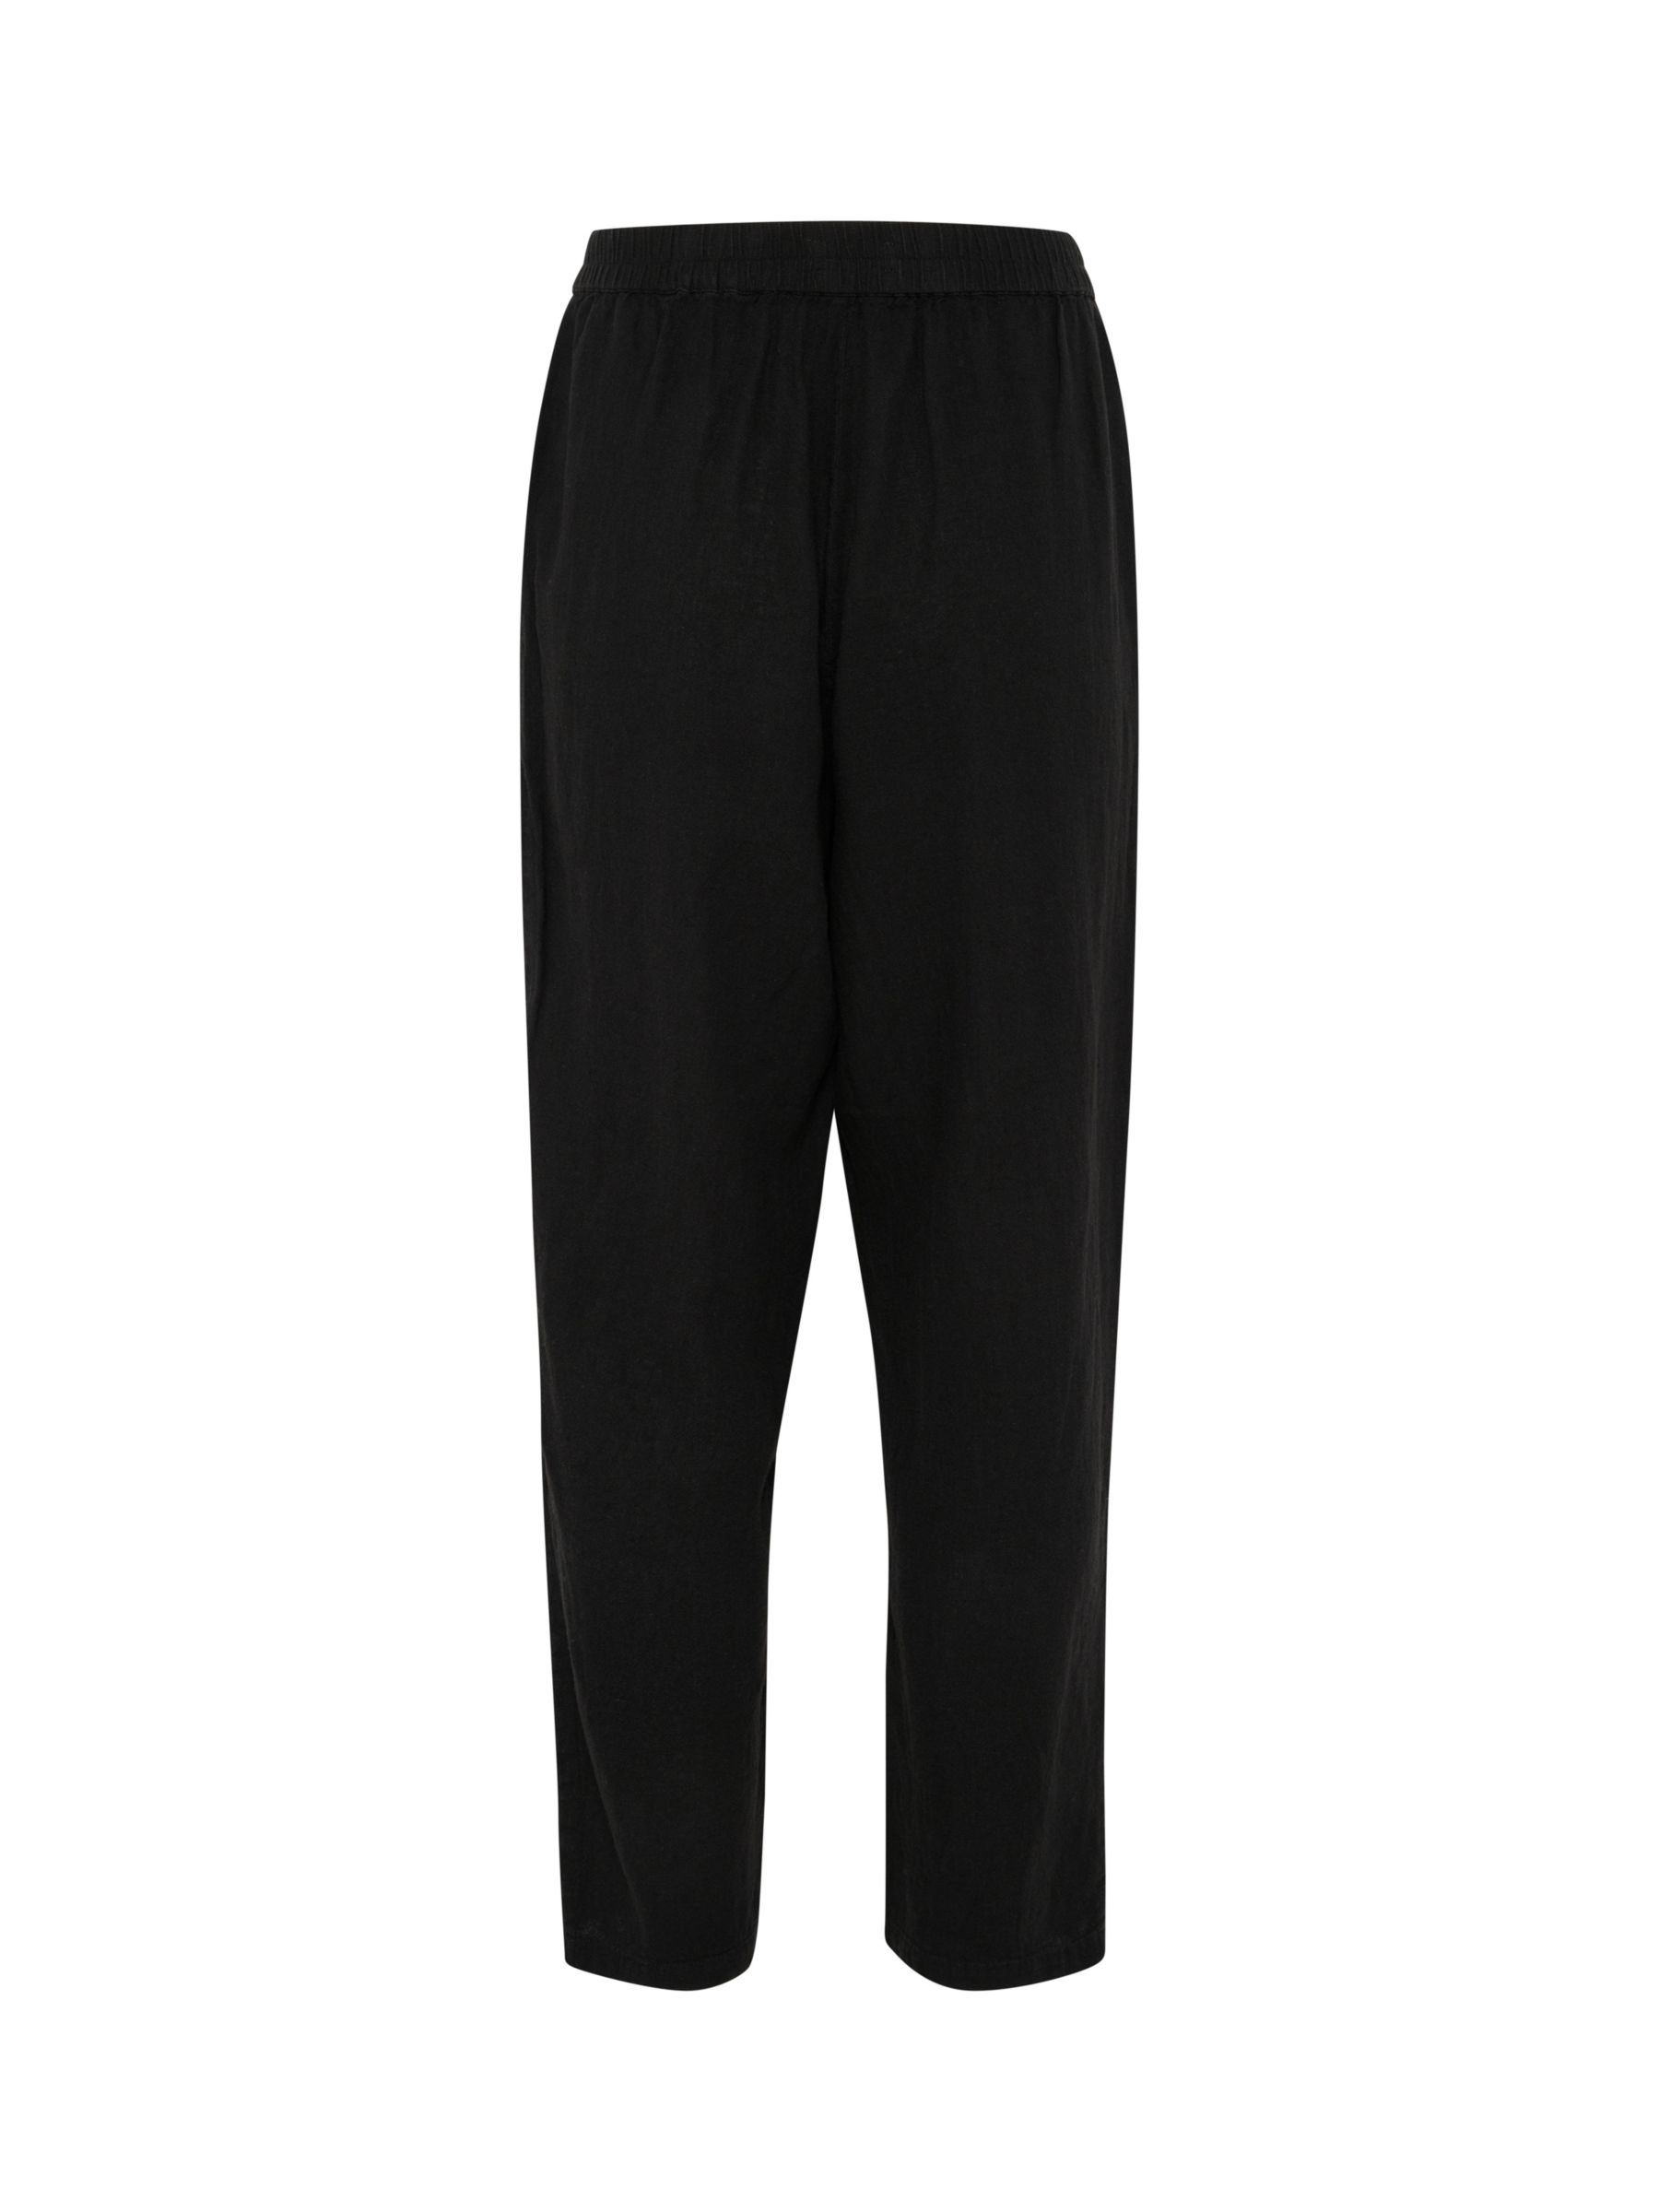 Soaked In Luxury Vinda Linen Blend Casual Cropped Trousers, Black, XS